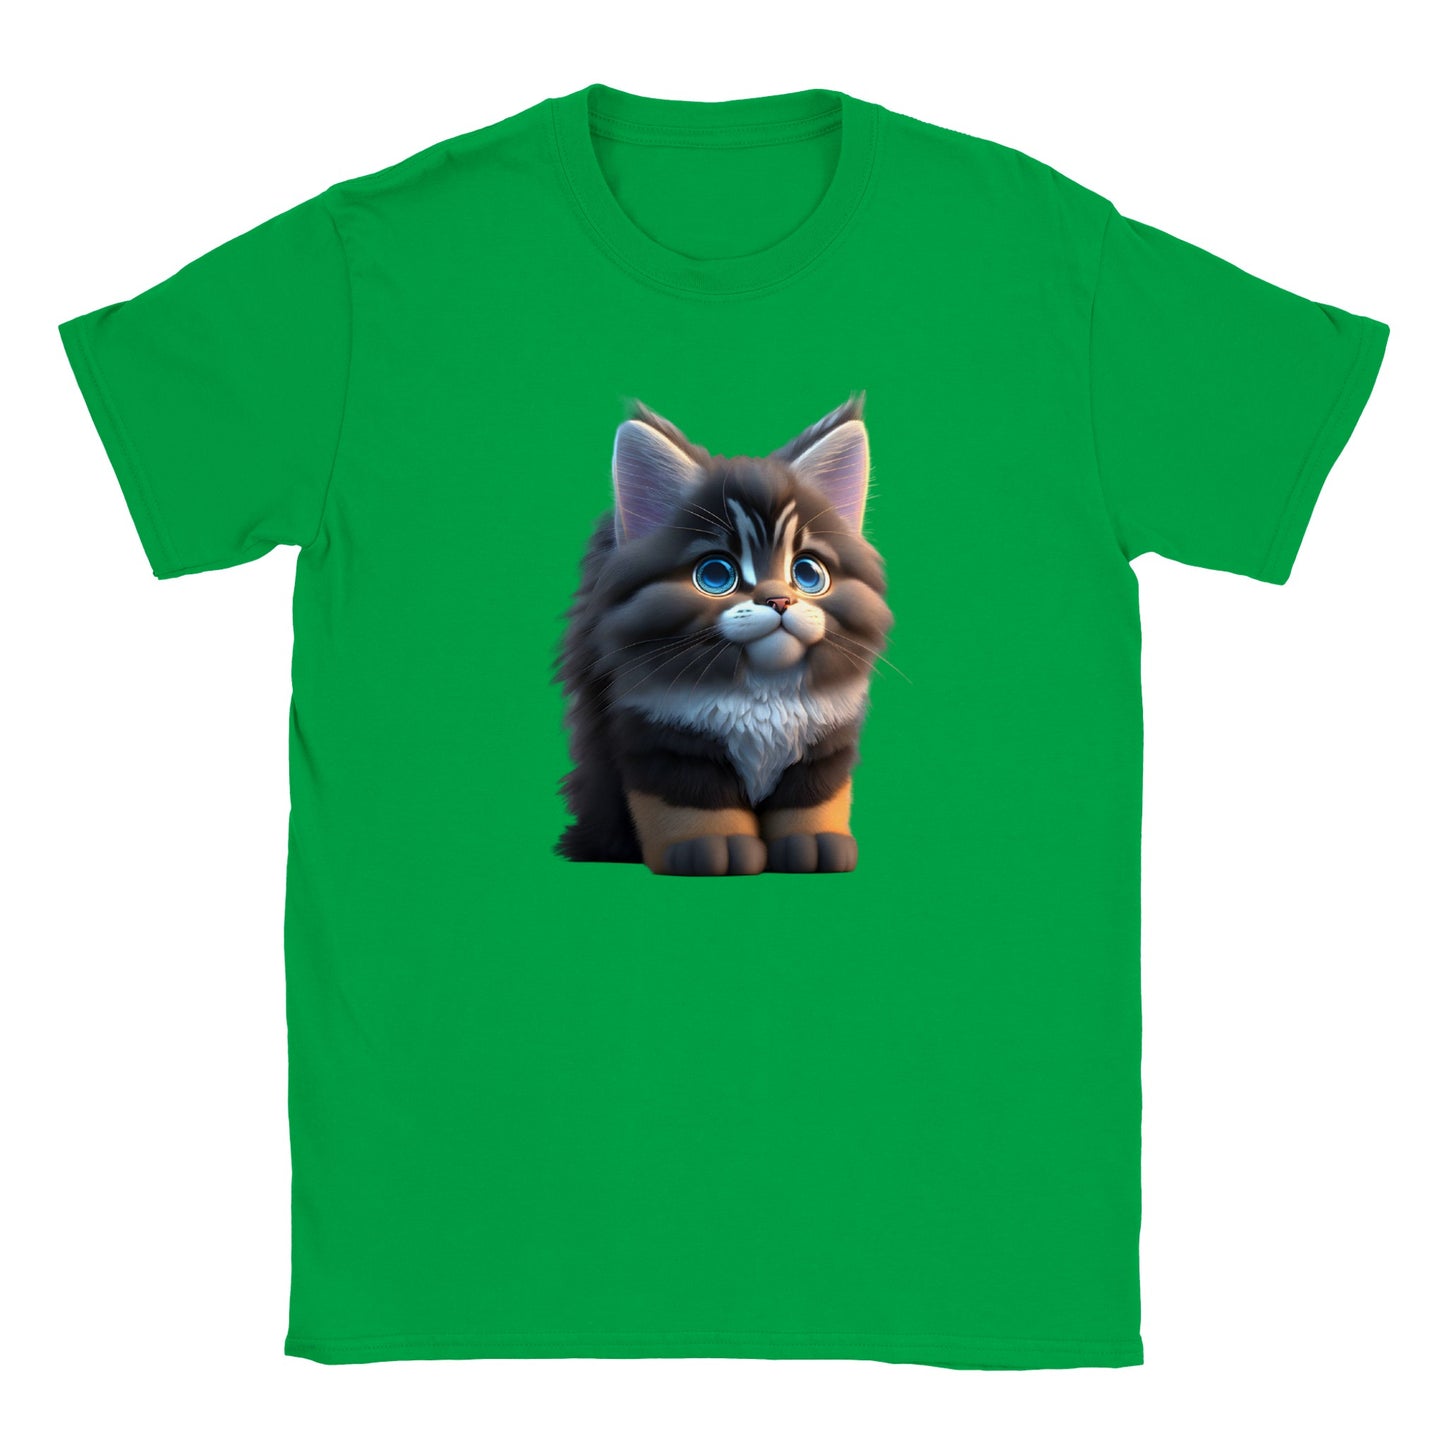 Adorable, Cool, Cute Cats and Kittens Toy - Classic Kids Crewneck T-Shirt 3